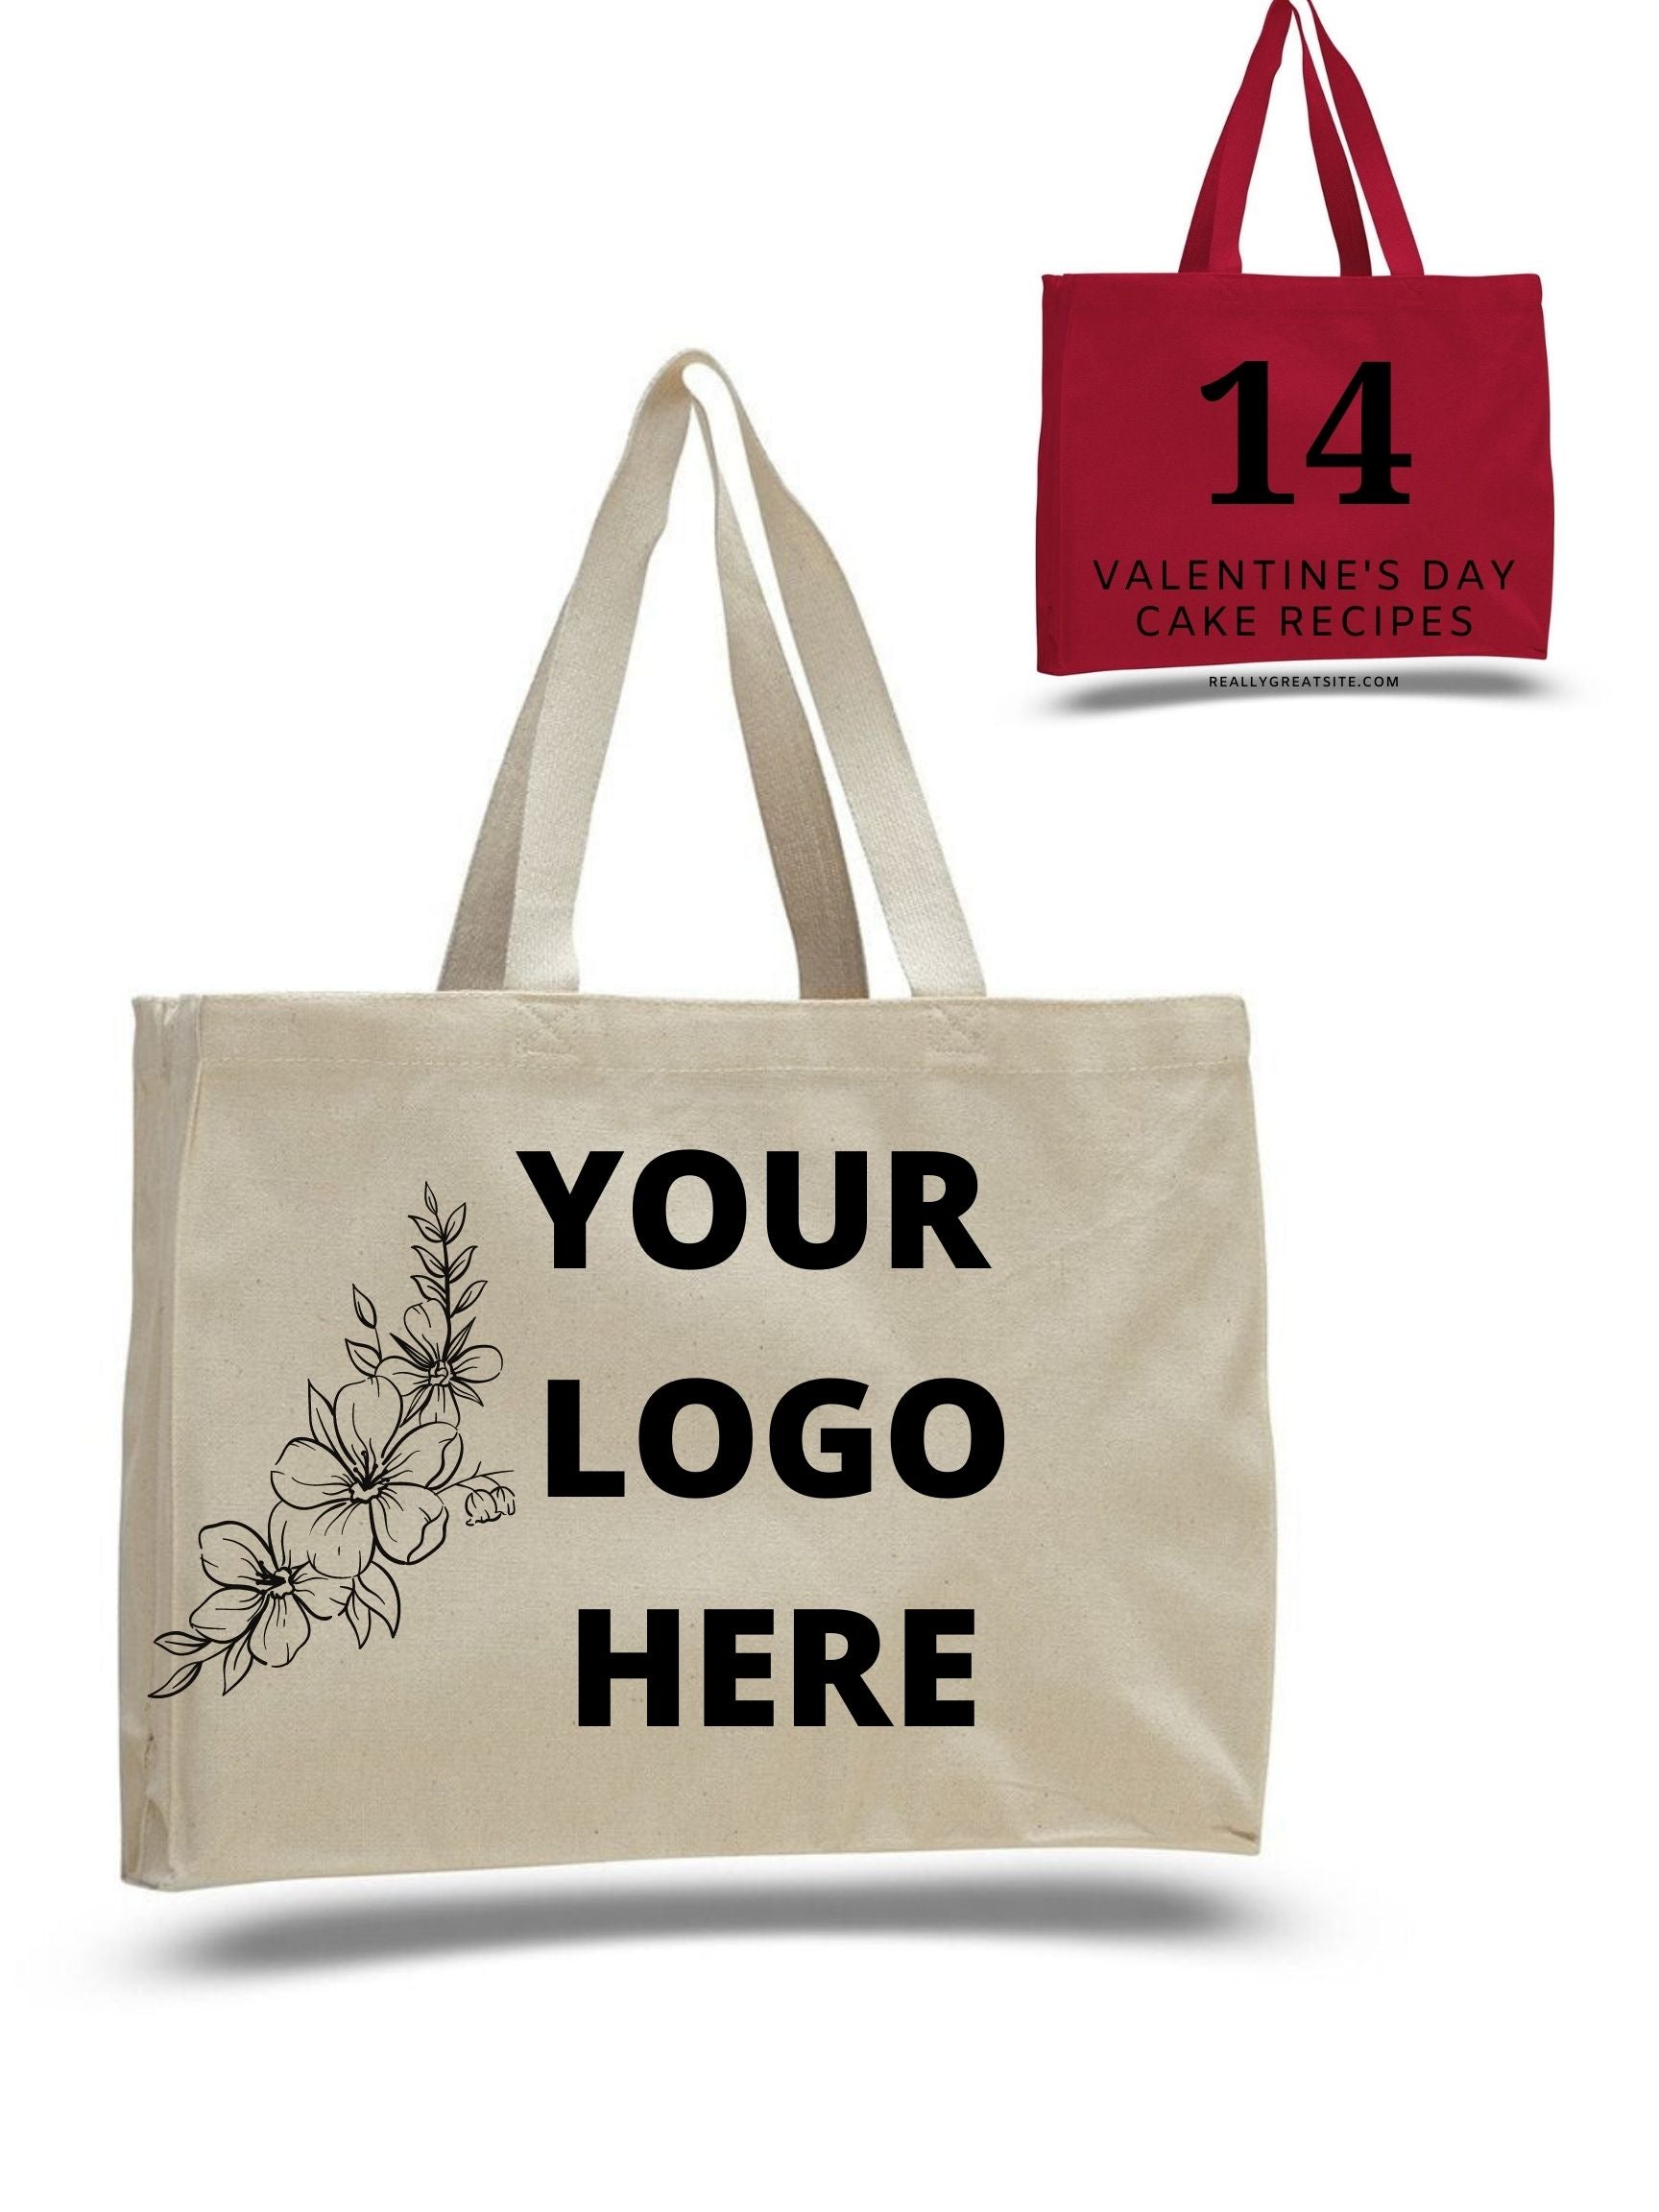 Custom The Most Durable Canvas Tote Bag on the Market!